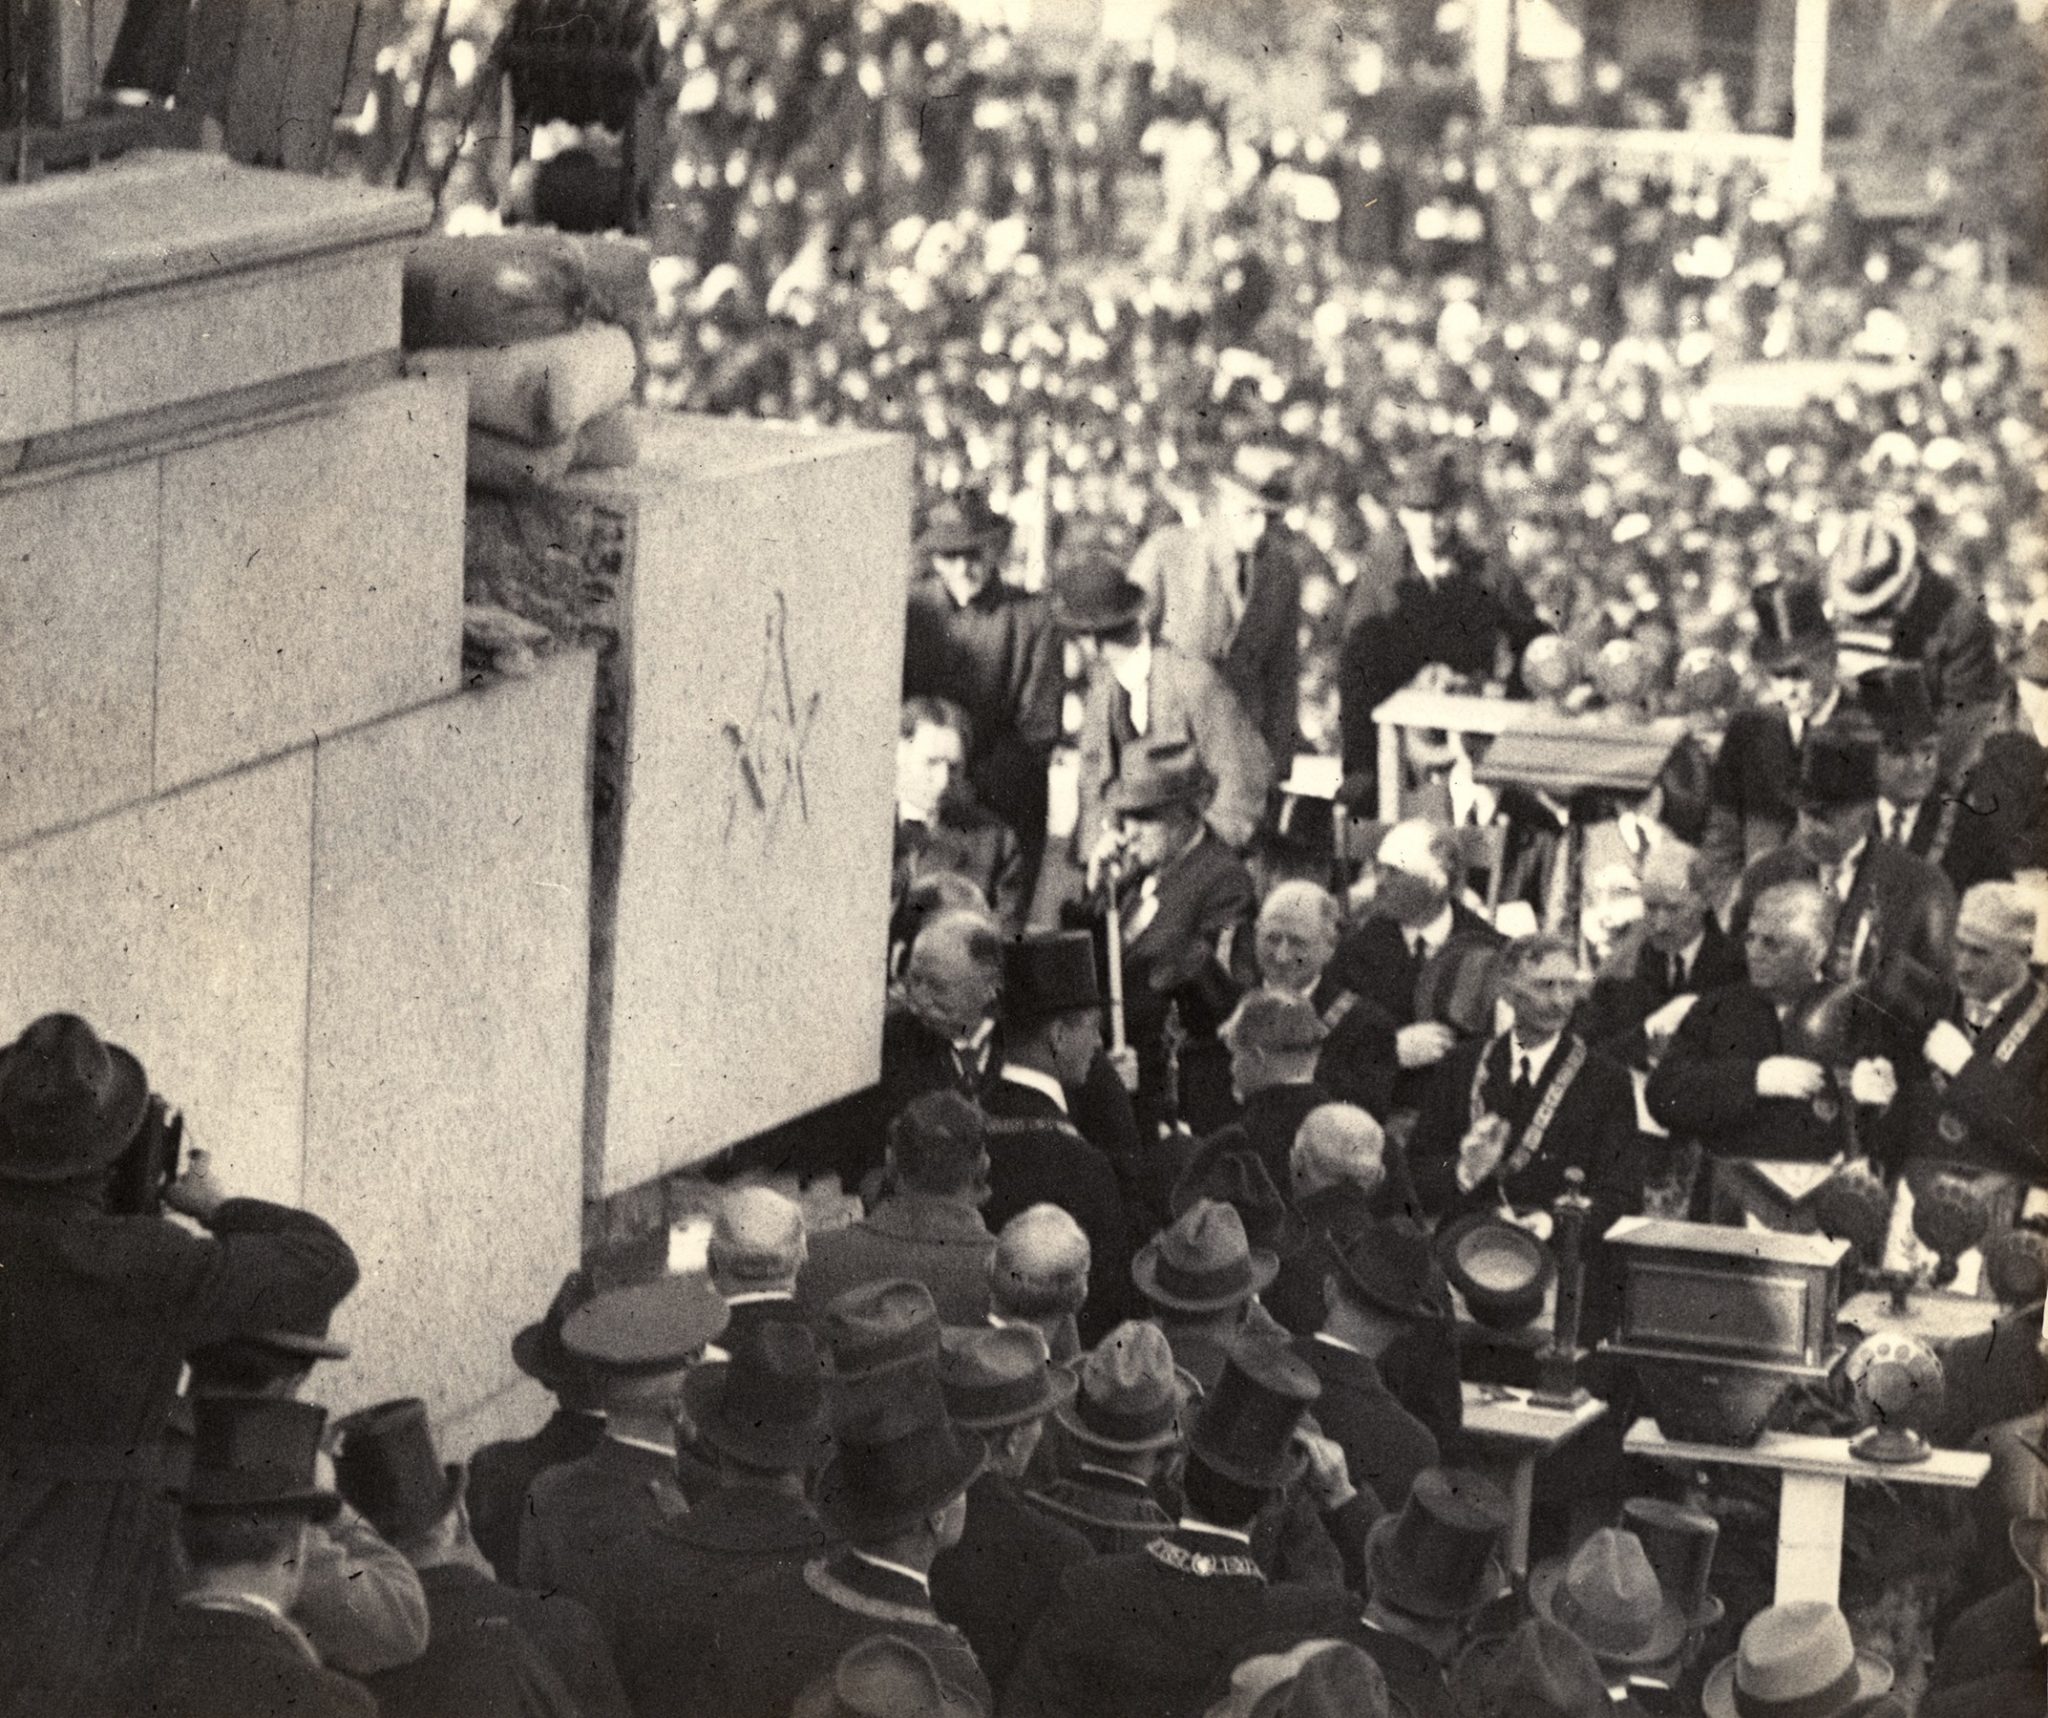 Top-hatted gentlemen and thousands of masons were on site in Alexandria, Virginia for the George Washington Masonic Memorial cornerstone dedication in 1923. (Photo: GW Masonic Memorial)